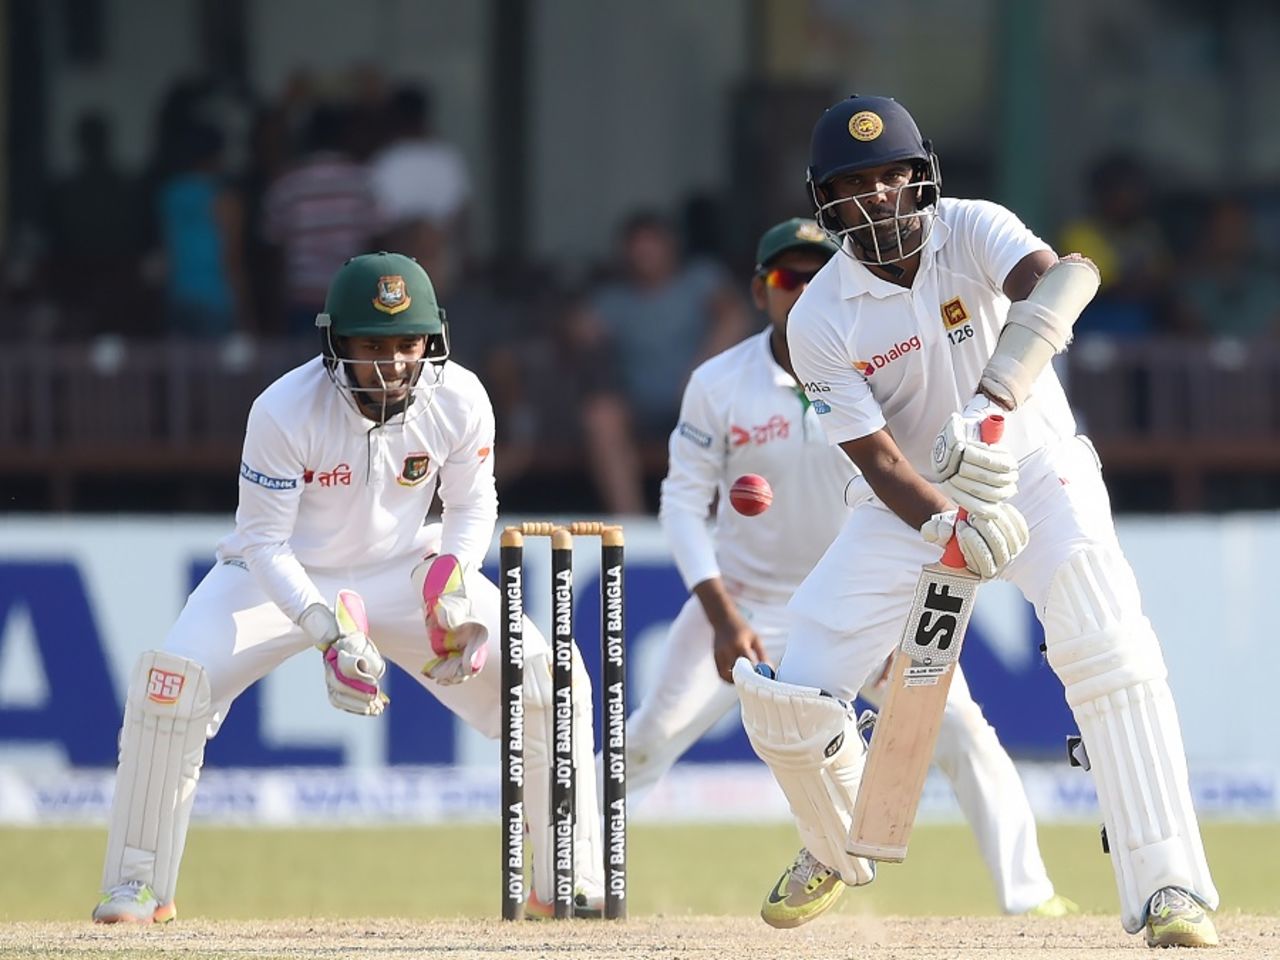 Dilruwan Perera played the blocking game in the post-tea session, Sri Lanka v Bangladesh, 2nd Test, Colombo, 4th day, March 18, 2017